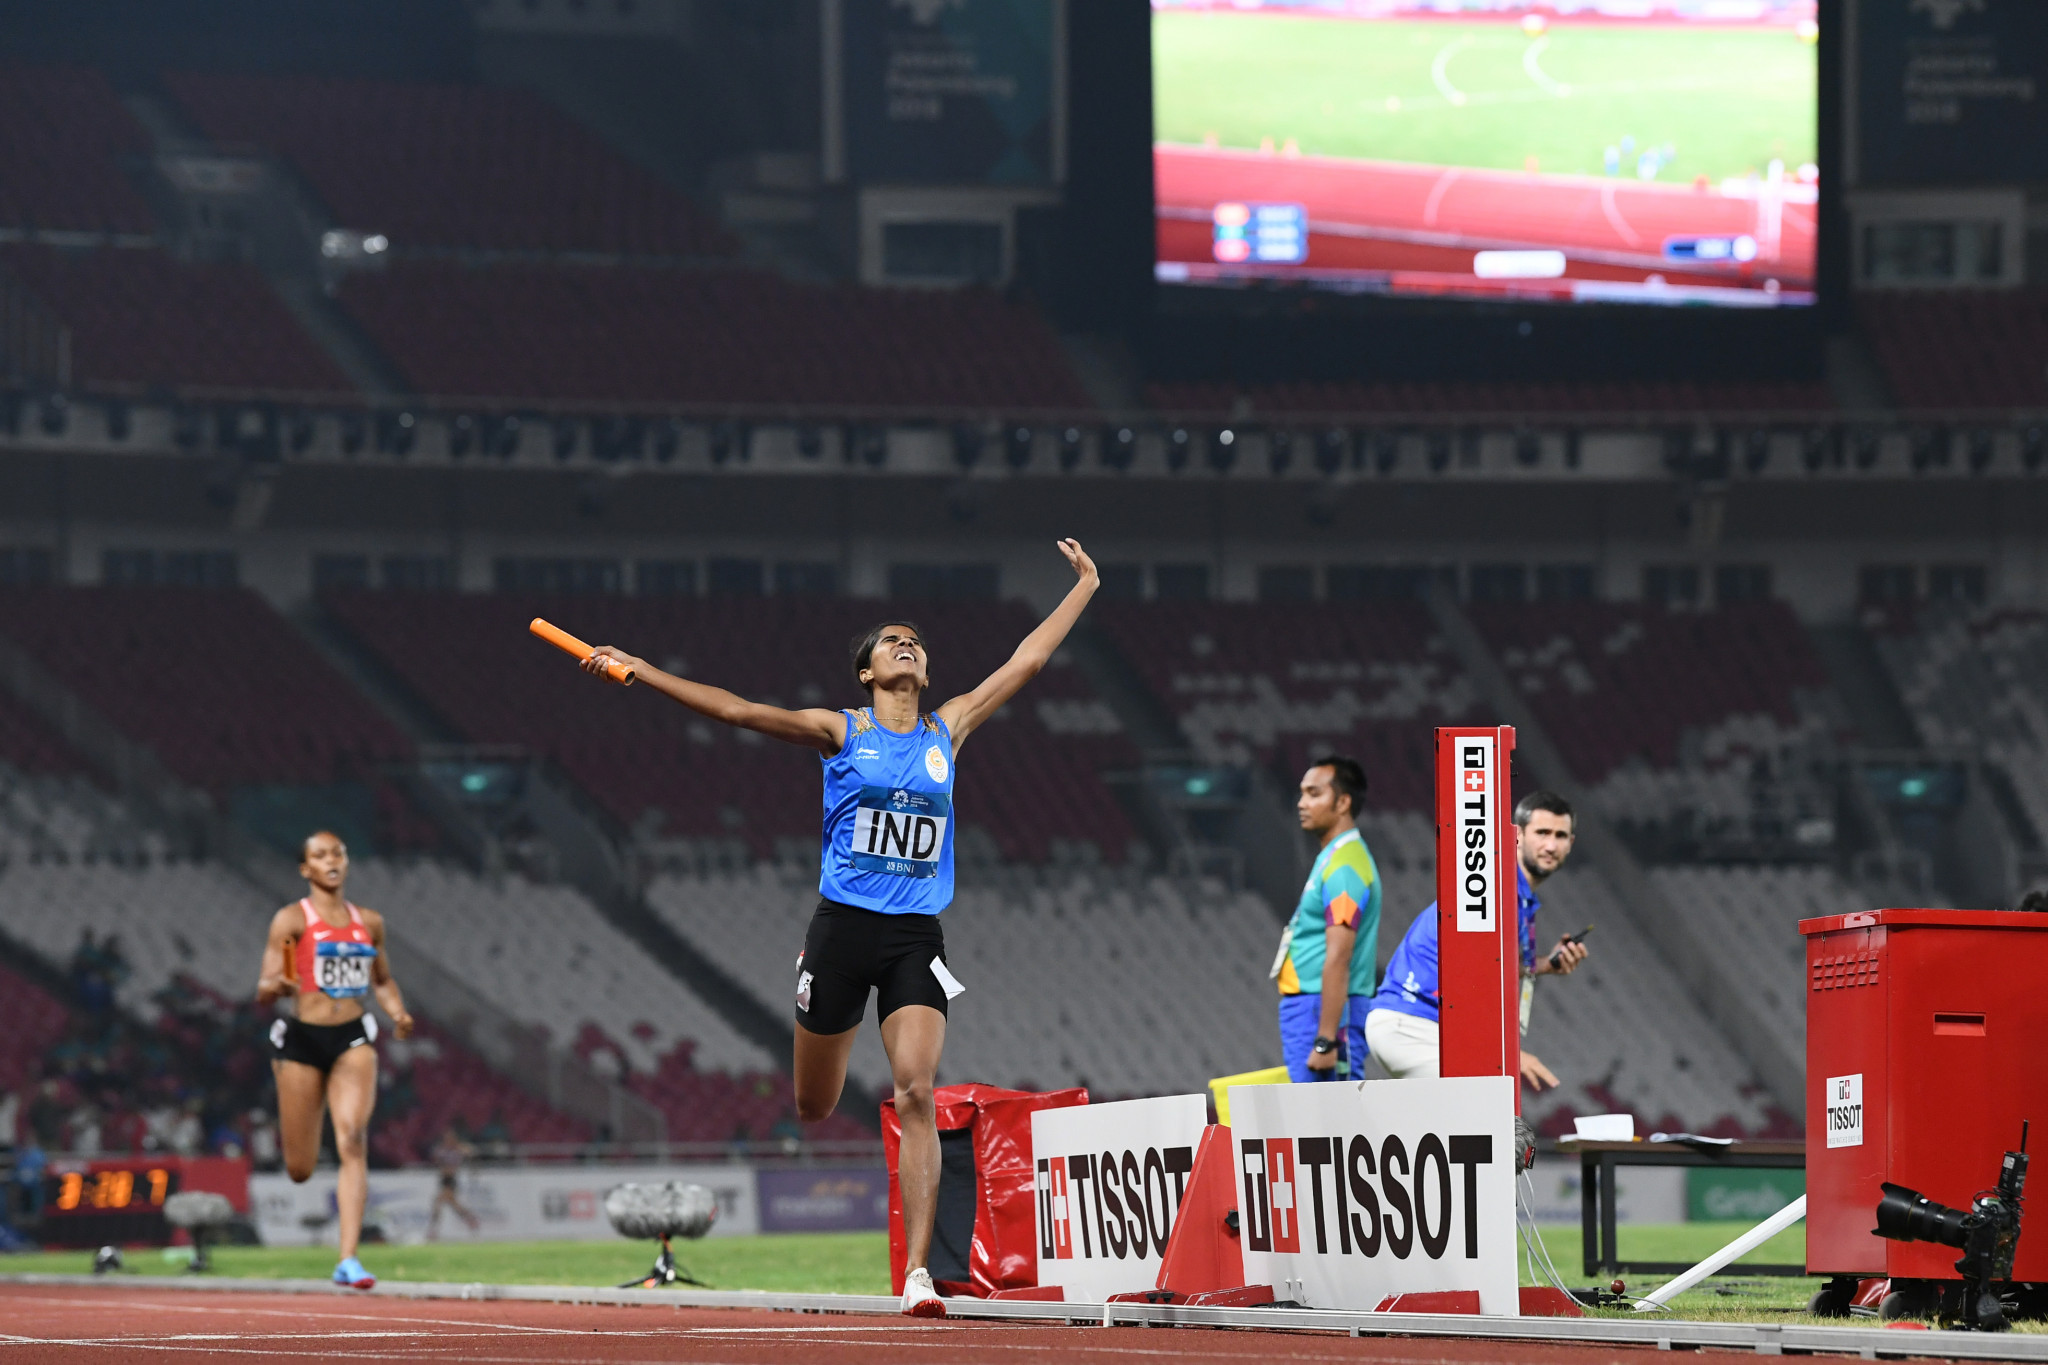 India has not earned an Olympic medal in athletics since 1900, but performed well in the sport at the 2018 Asian Games ©Getty Images